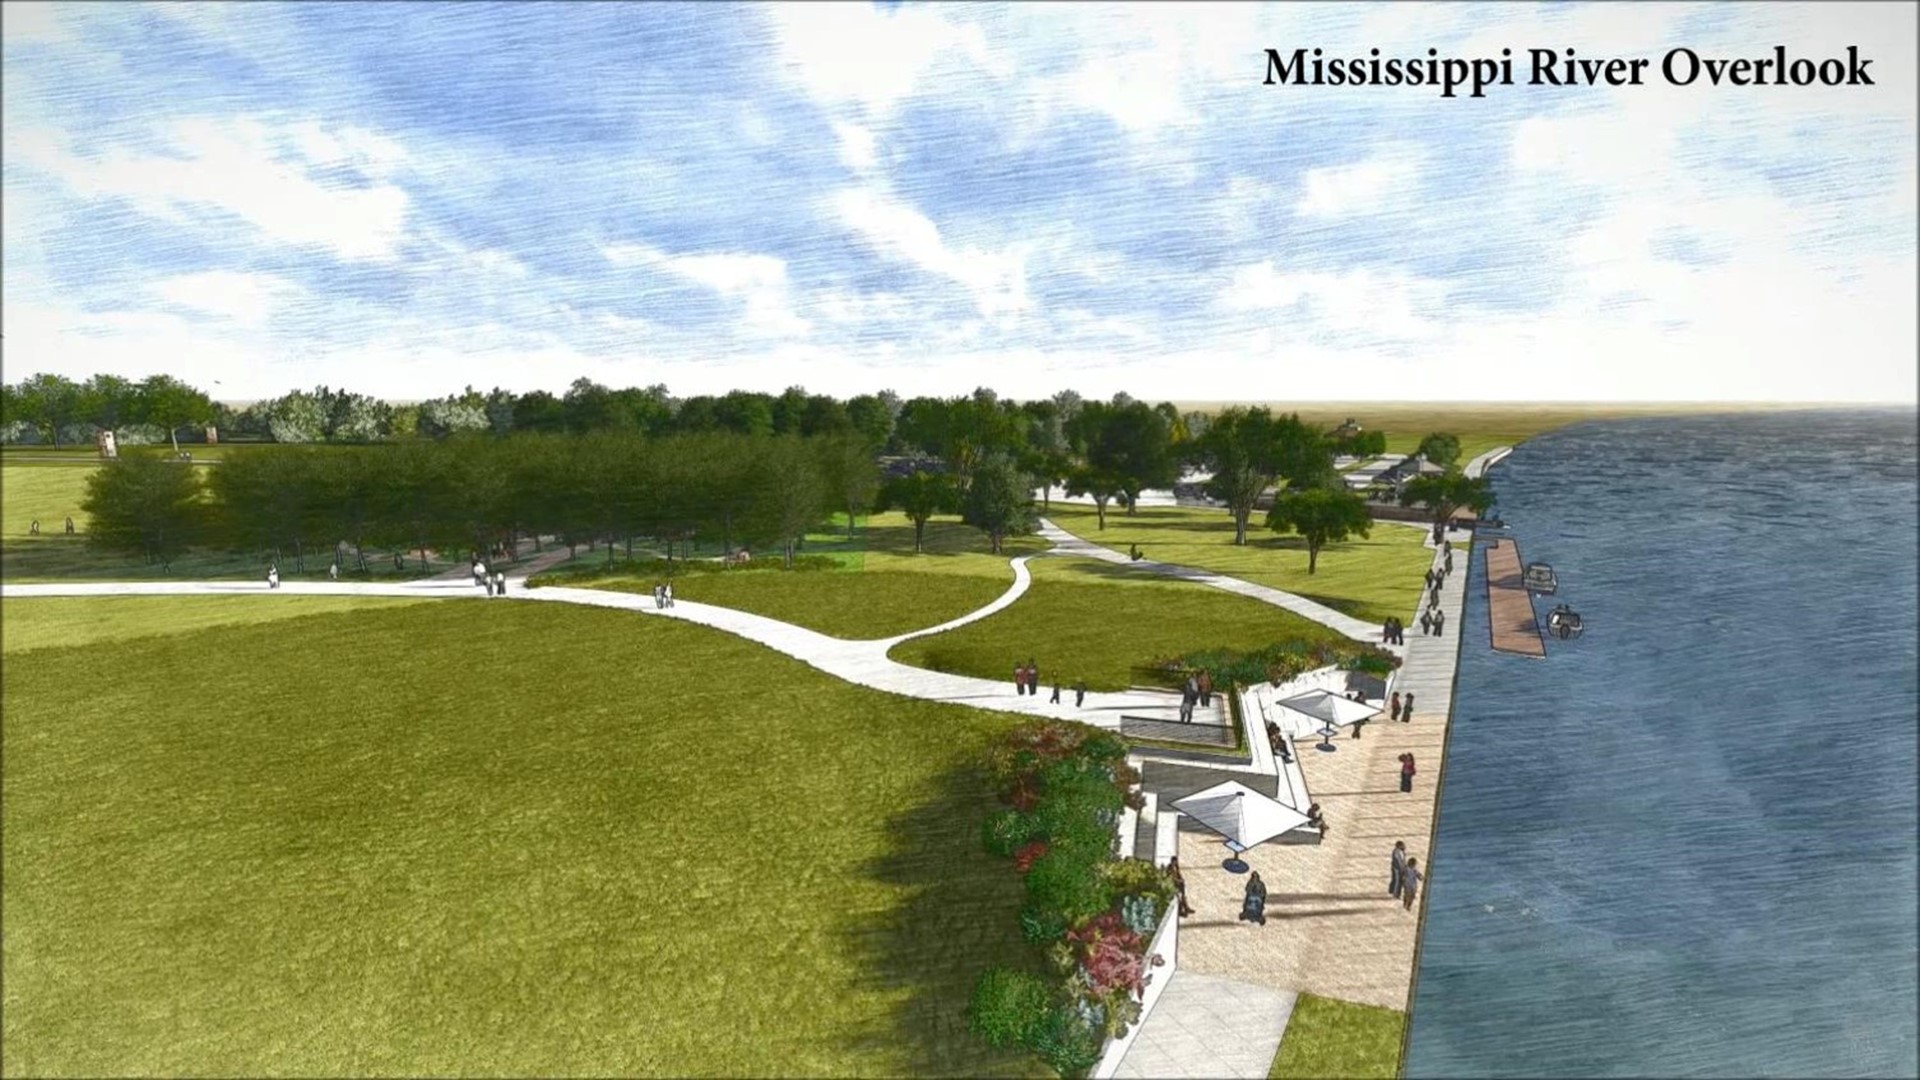 Park enhancements include a river overlook, landscaping, park amenities, and circulation trails.